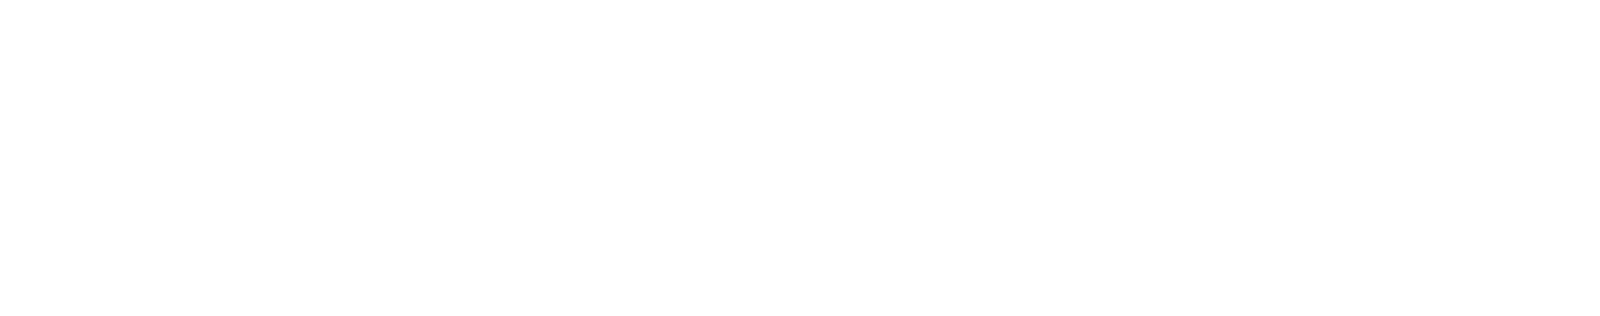 The Heights Church